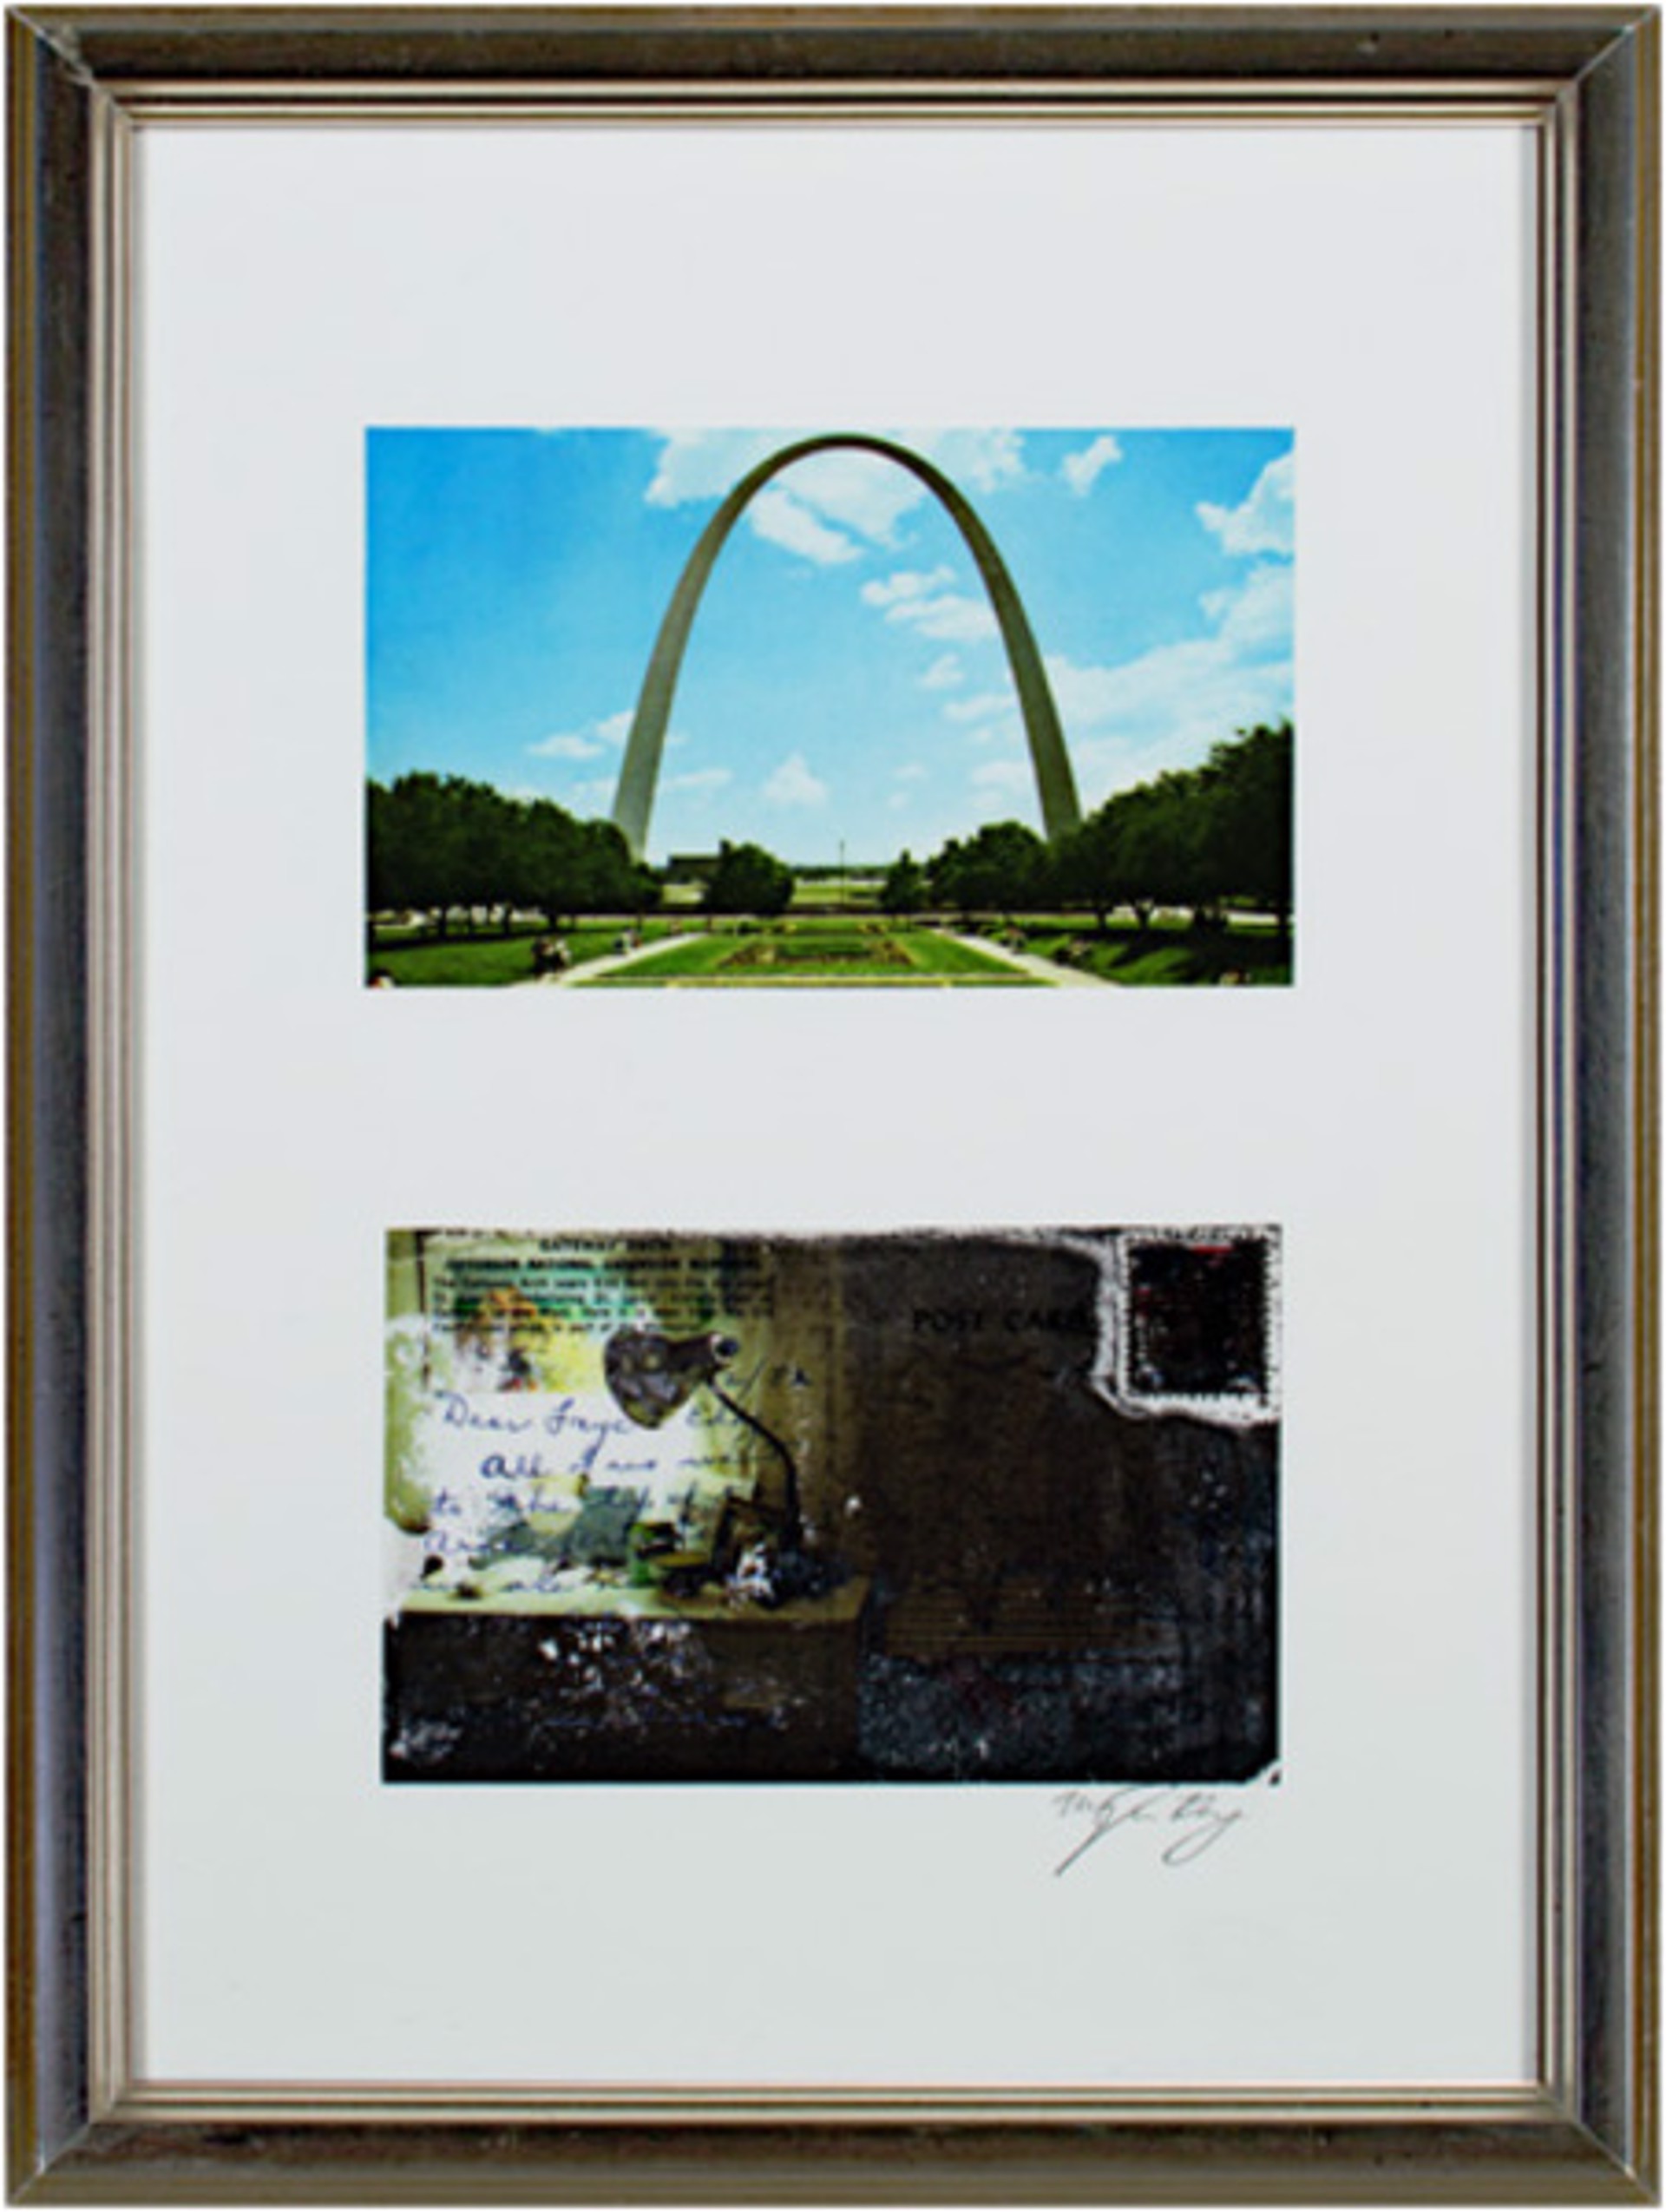 Gateway Arch, St. Louis, MO after original postcard (front&back) by Meghan Ray